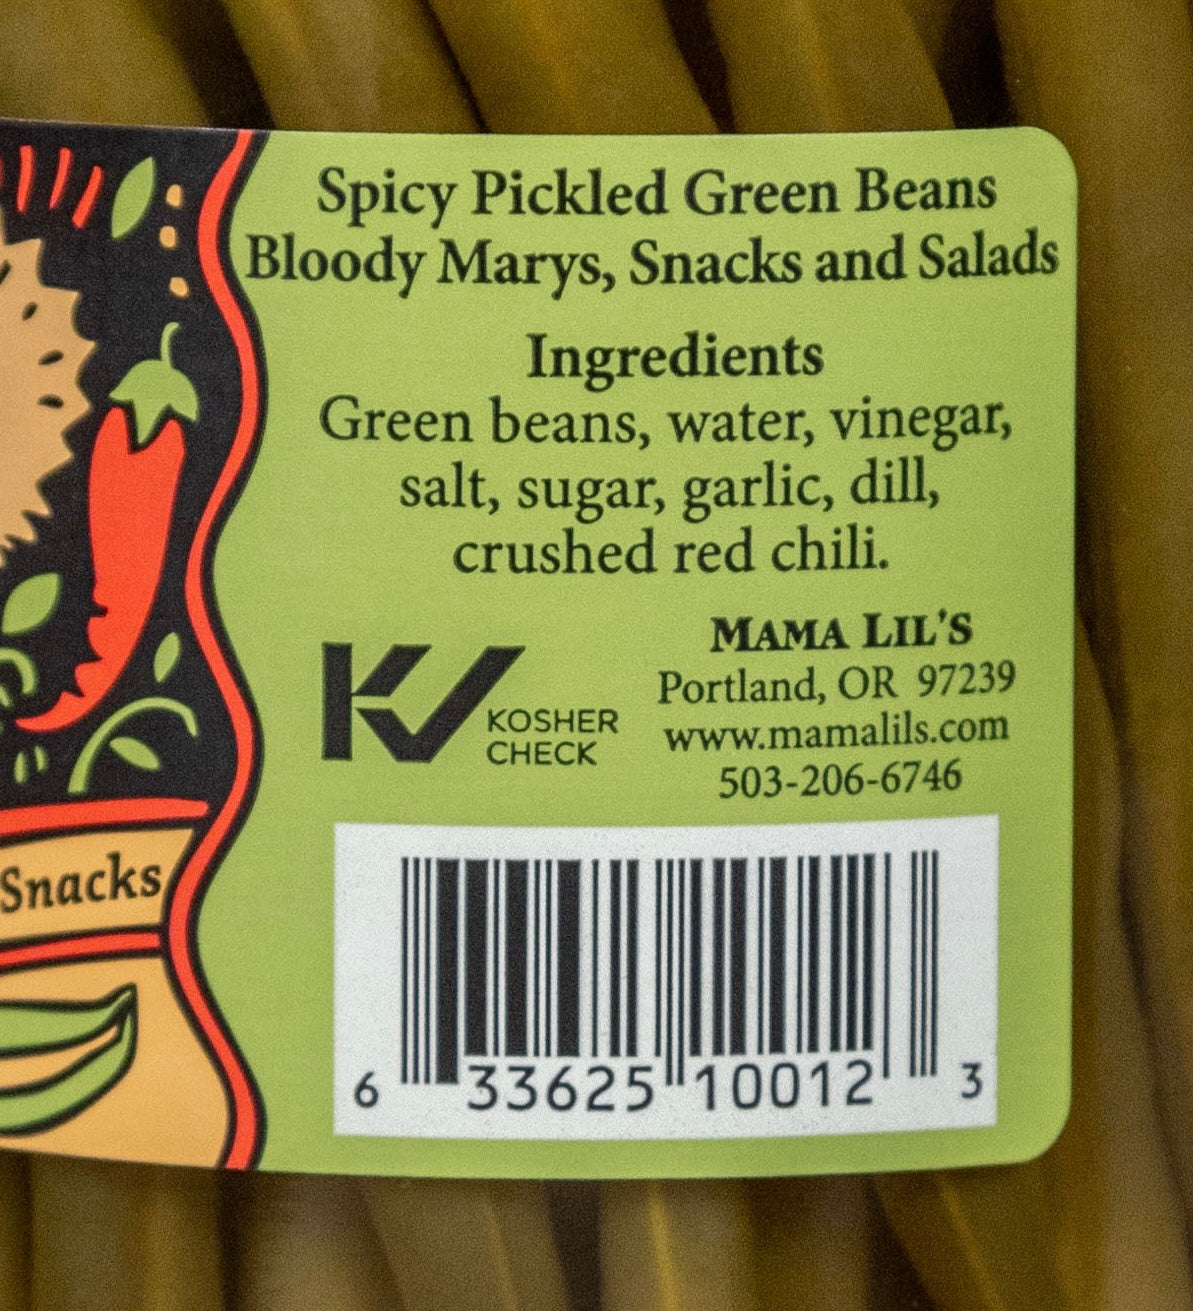 Mama Lil's Pickled Green Beans - 26.5oz. 4-pack